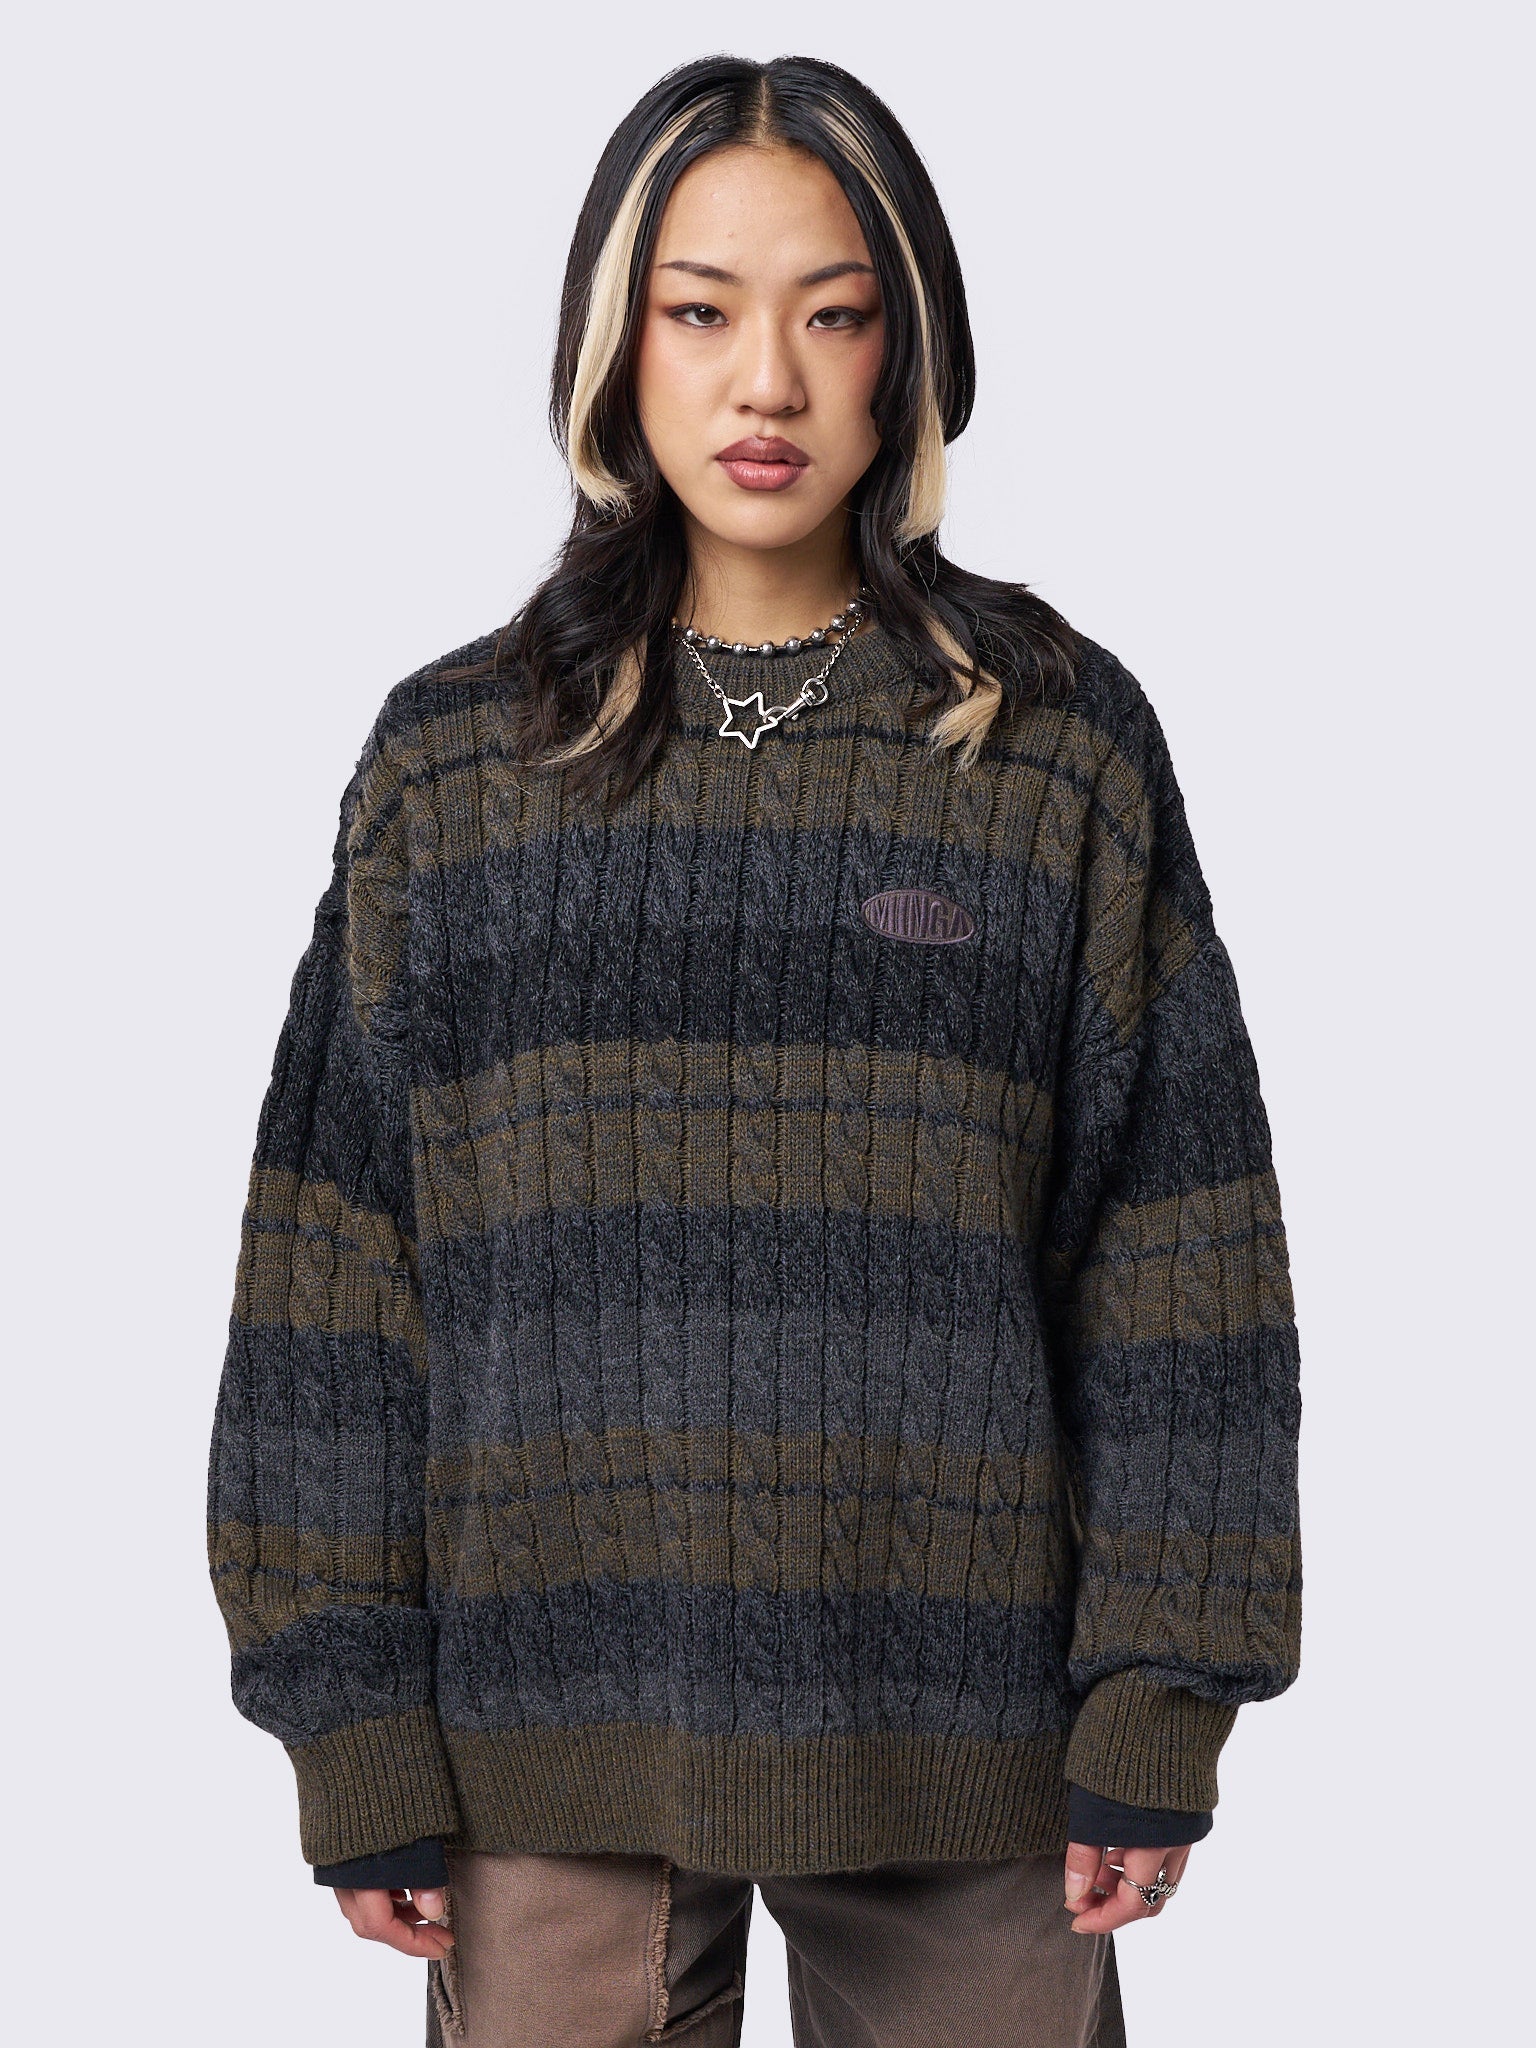 Striped Cable Knit Jumper for Grunge Winter Style - Vintage Inspired |  Minga London – Minga London US